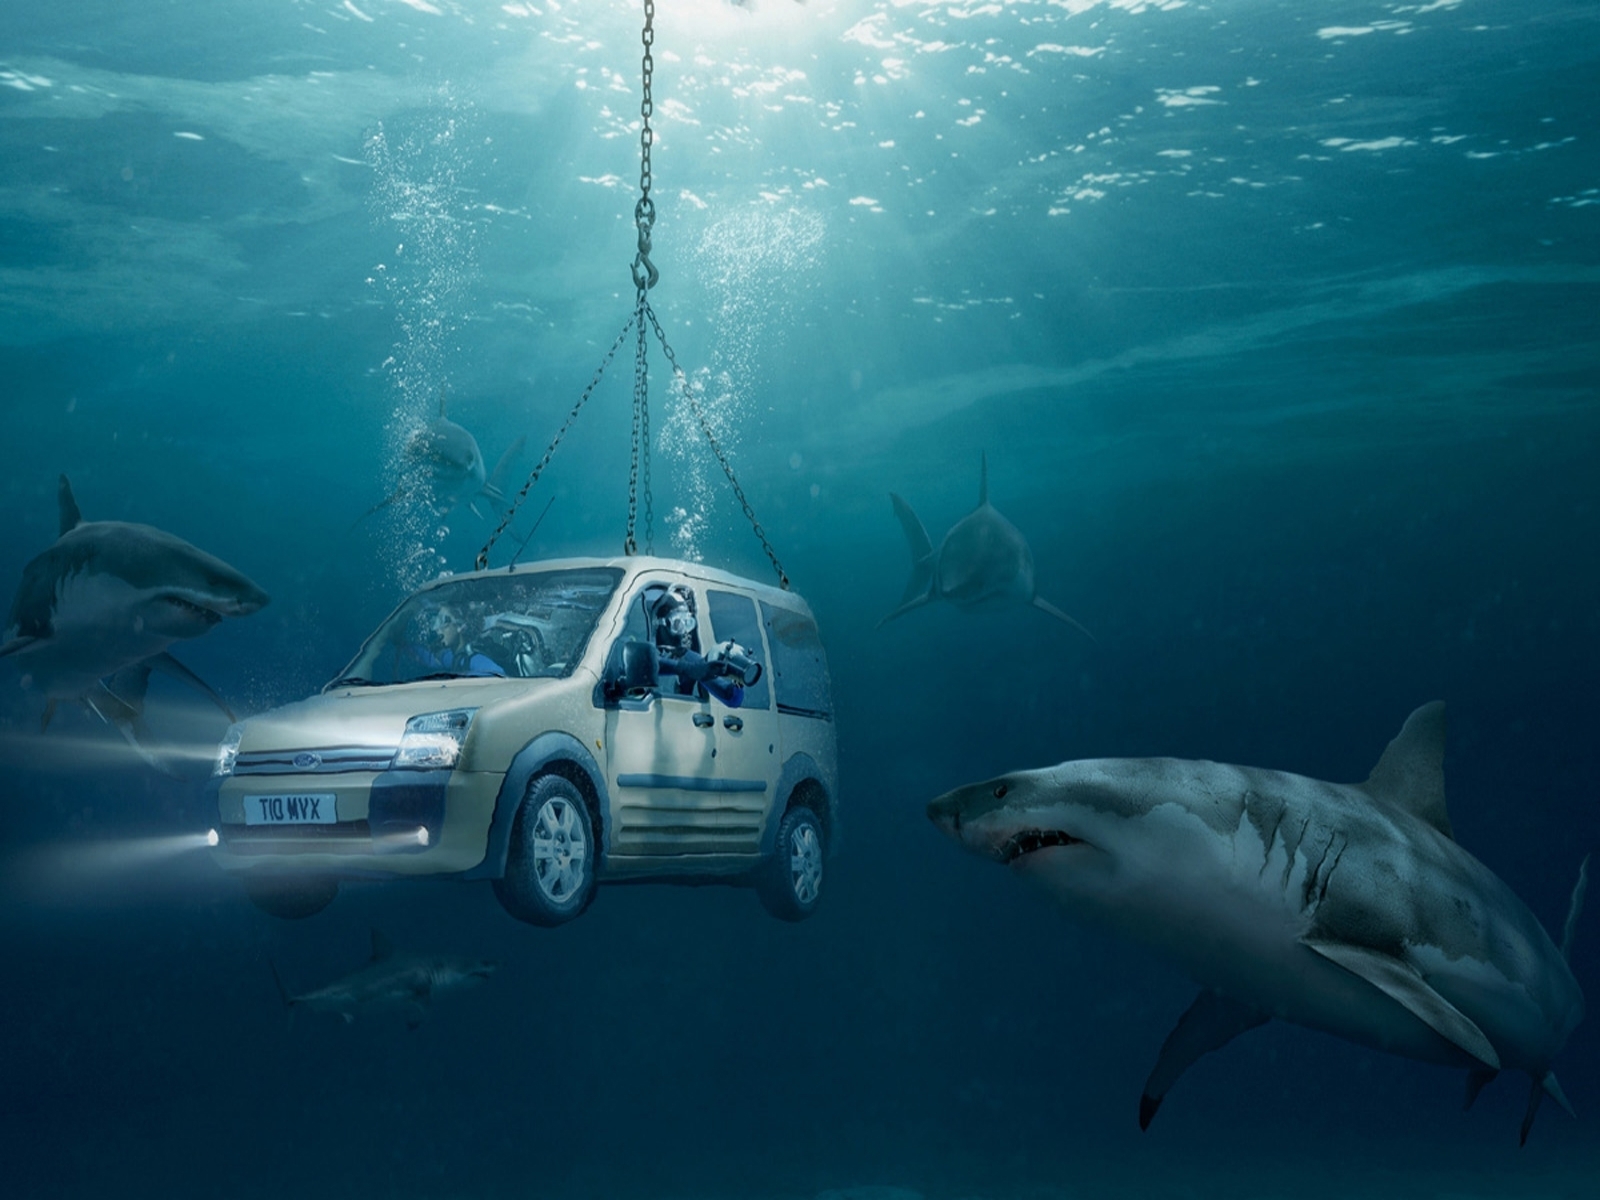 sharks, funny, auto, sea, ford, turquoise Full HD